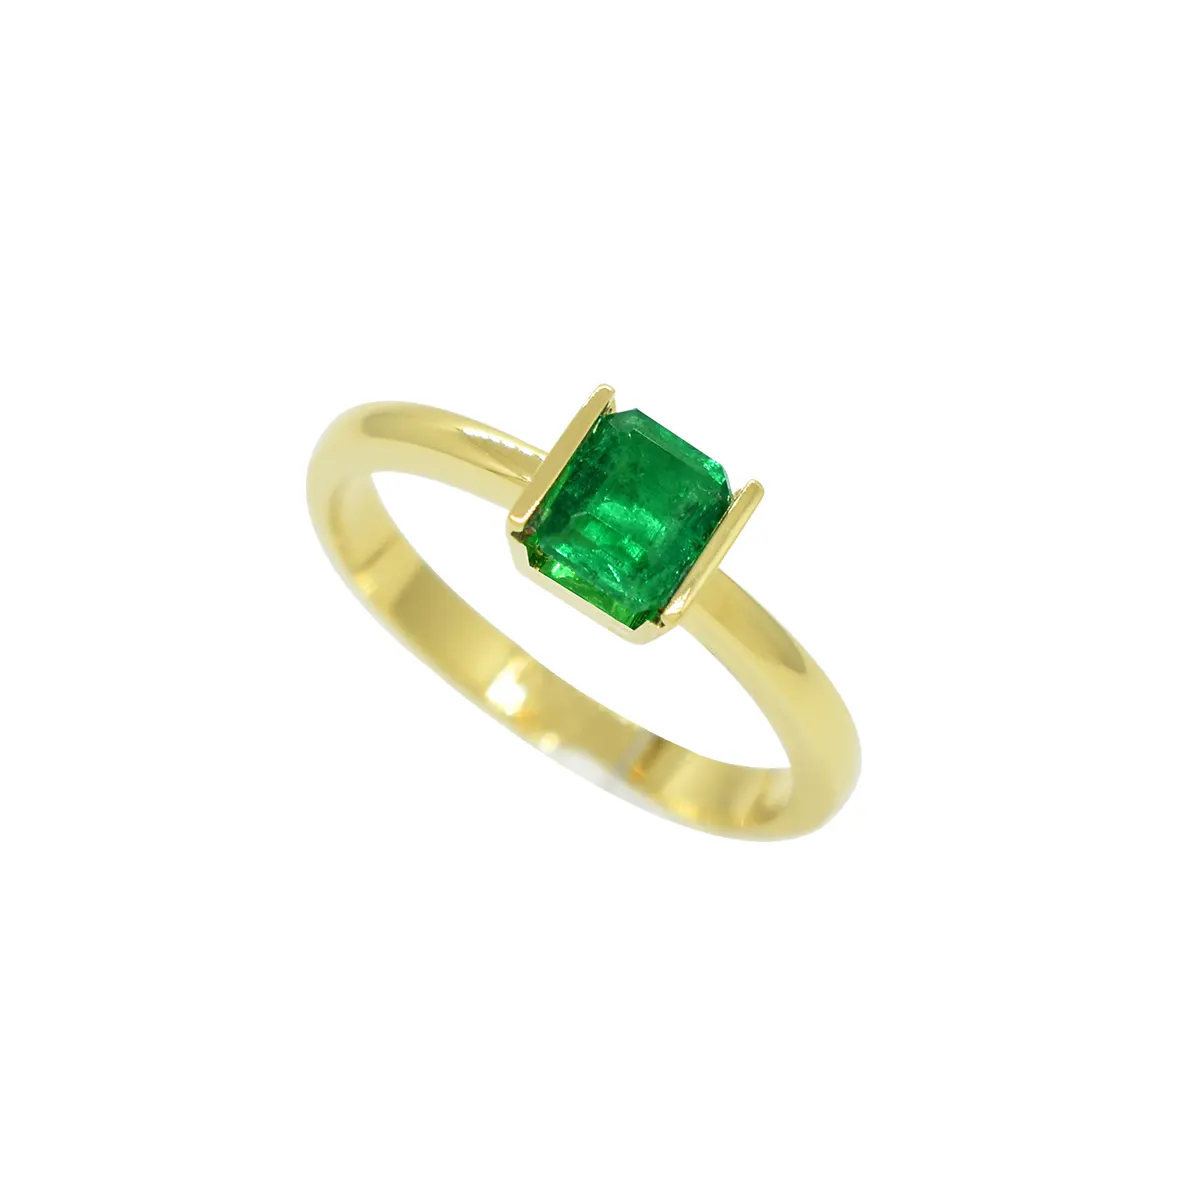 The open tension setting gives the ring a contemporary and minimalistic look, allowing the emerald to be the focal point